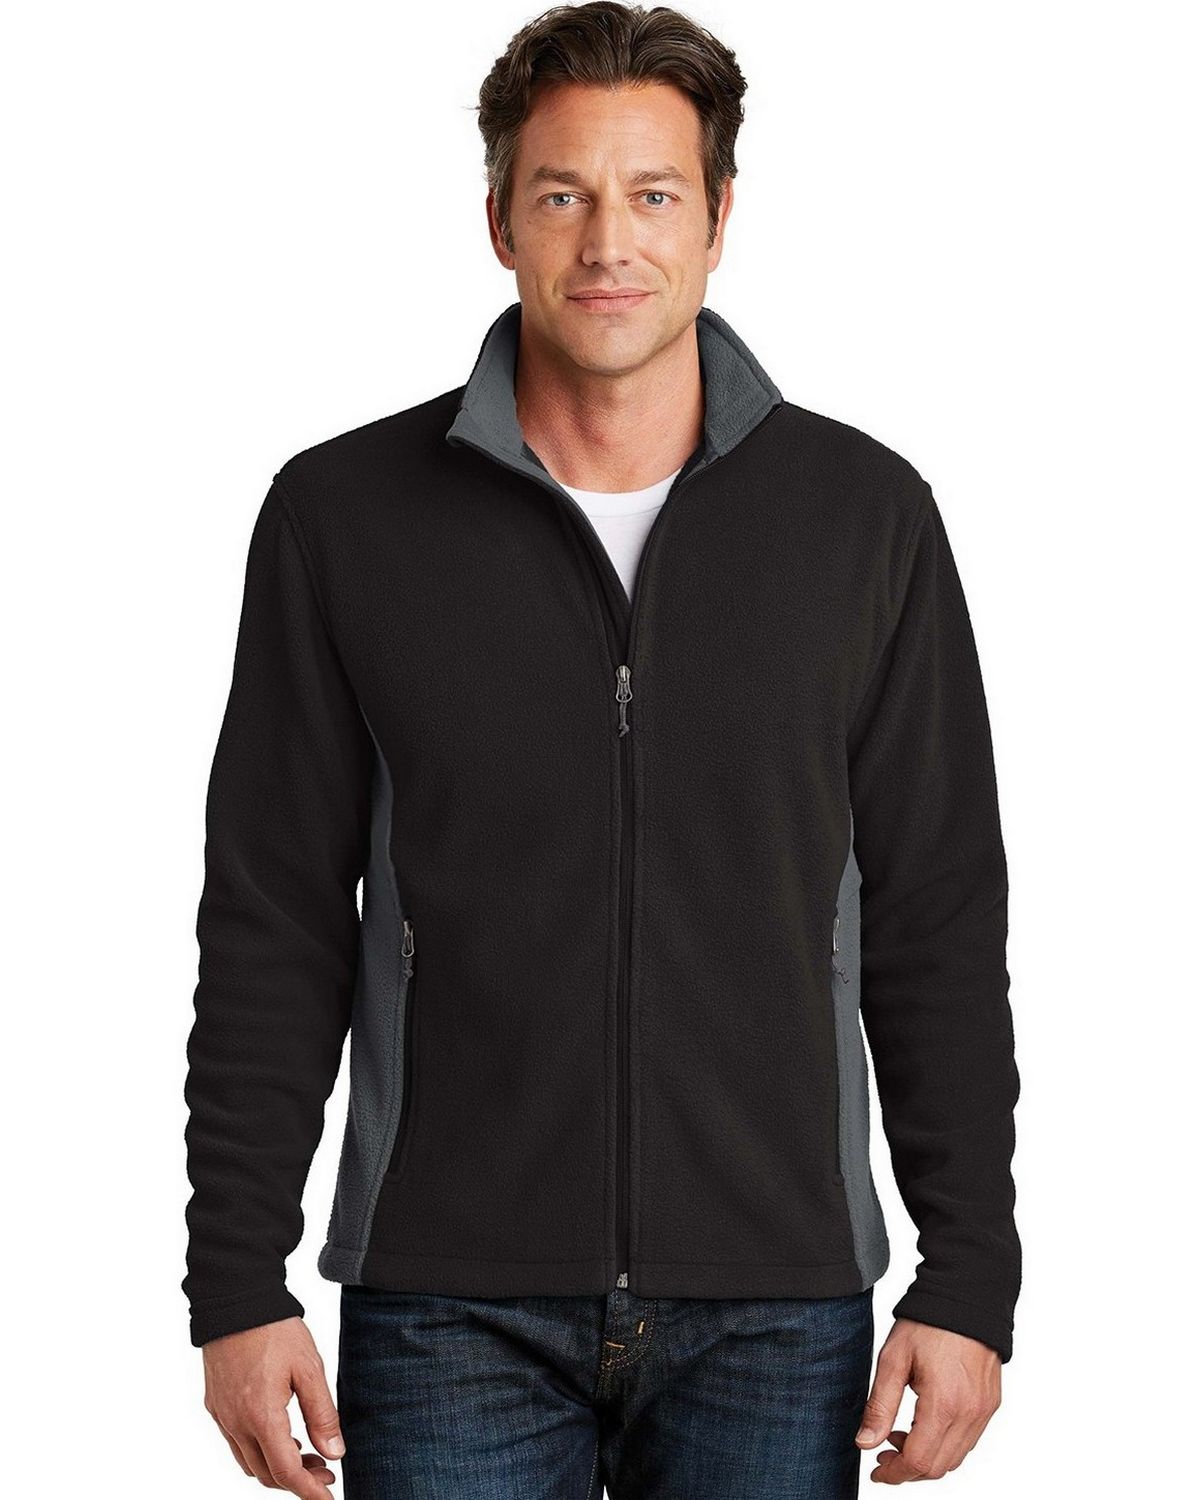 Size Chart for Port Authority F216 Colorblock Value Fleece Jacket